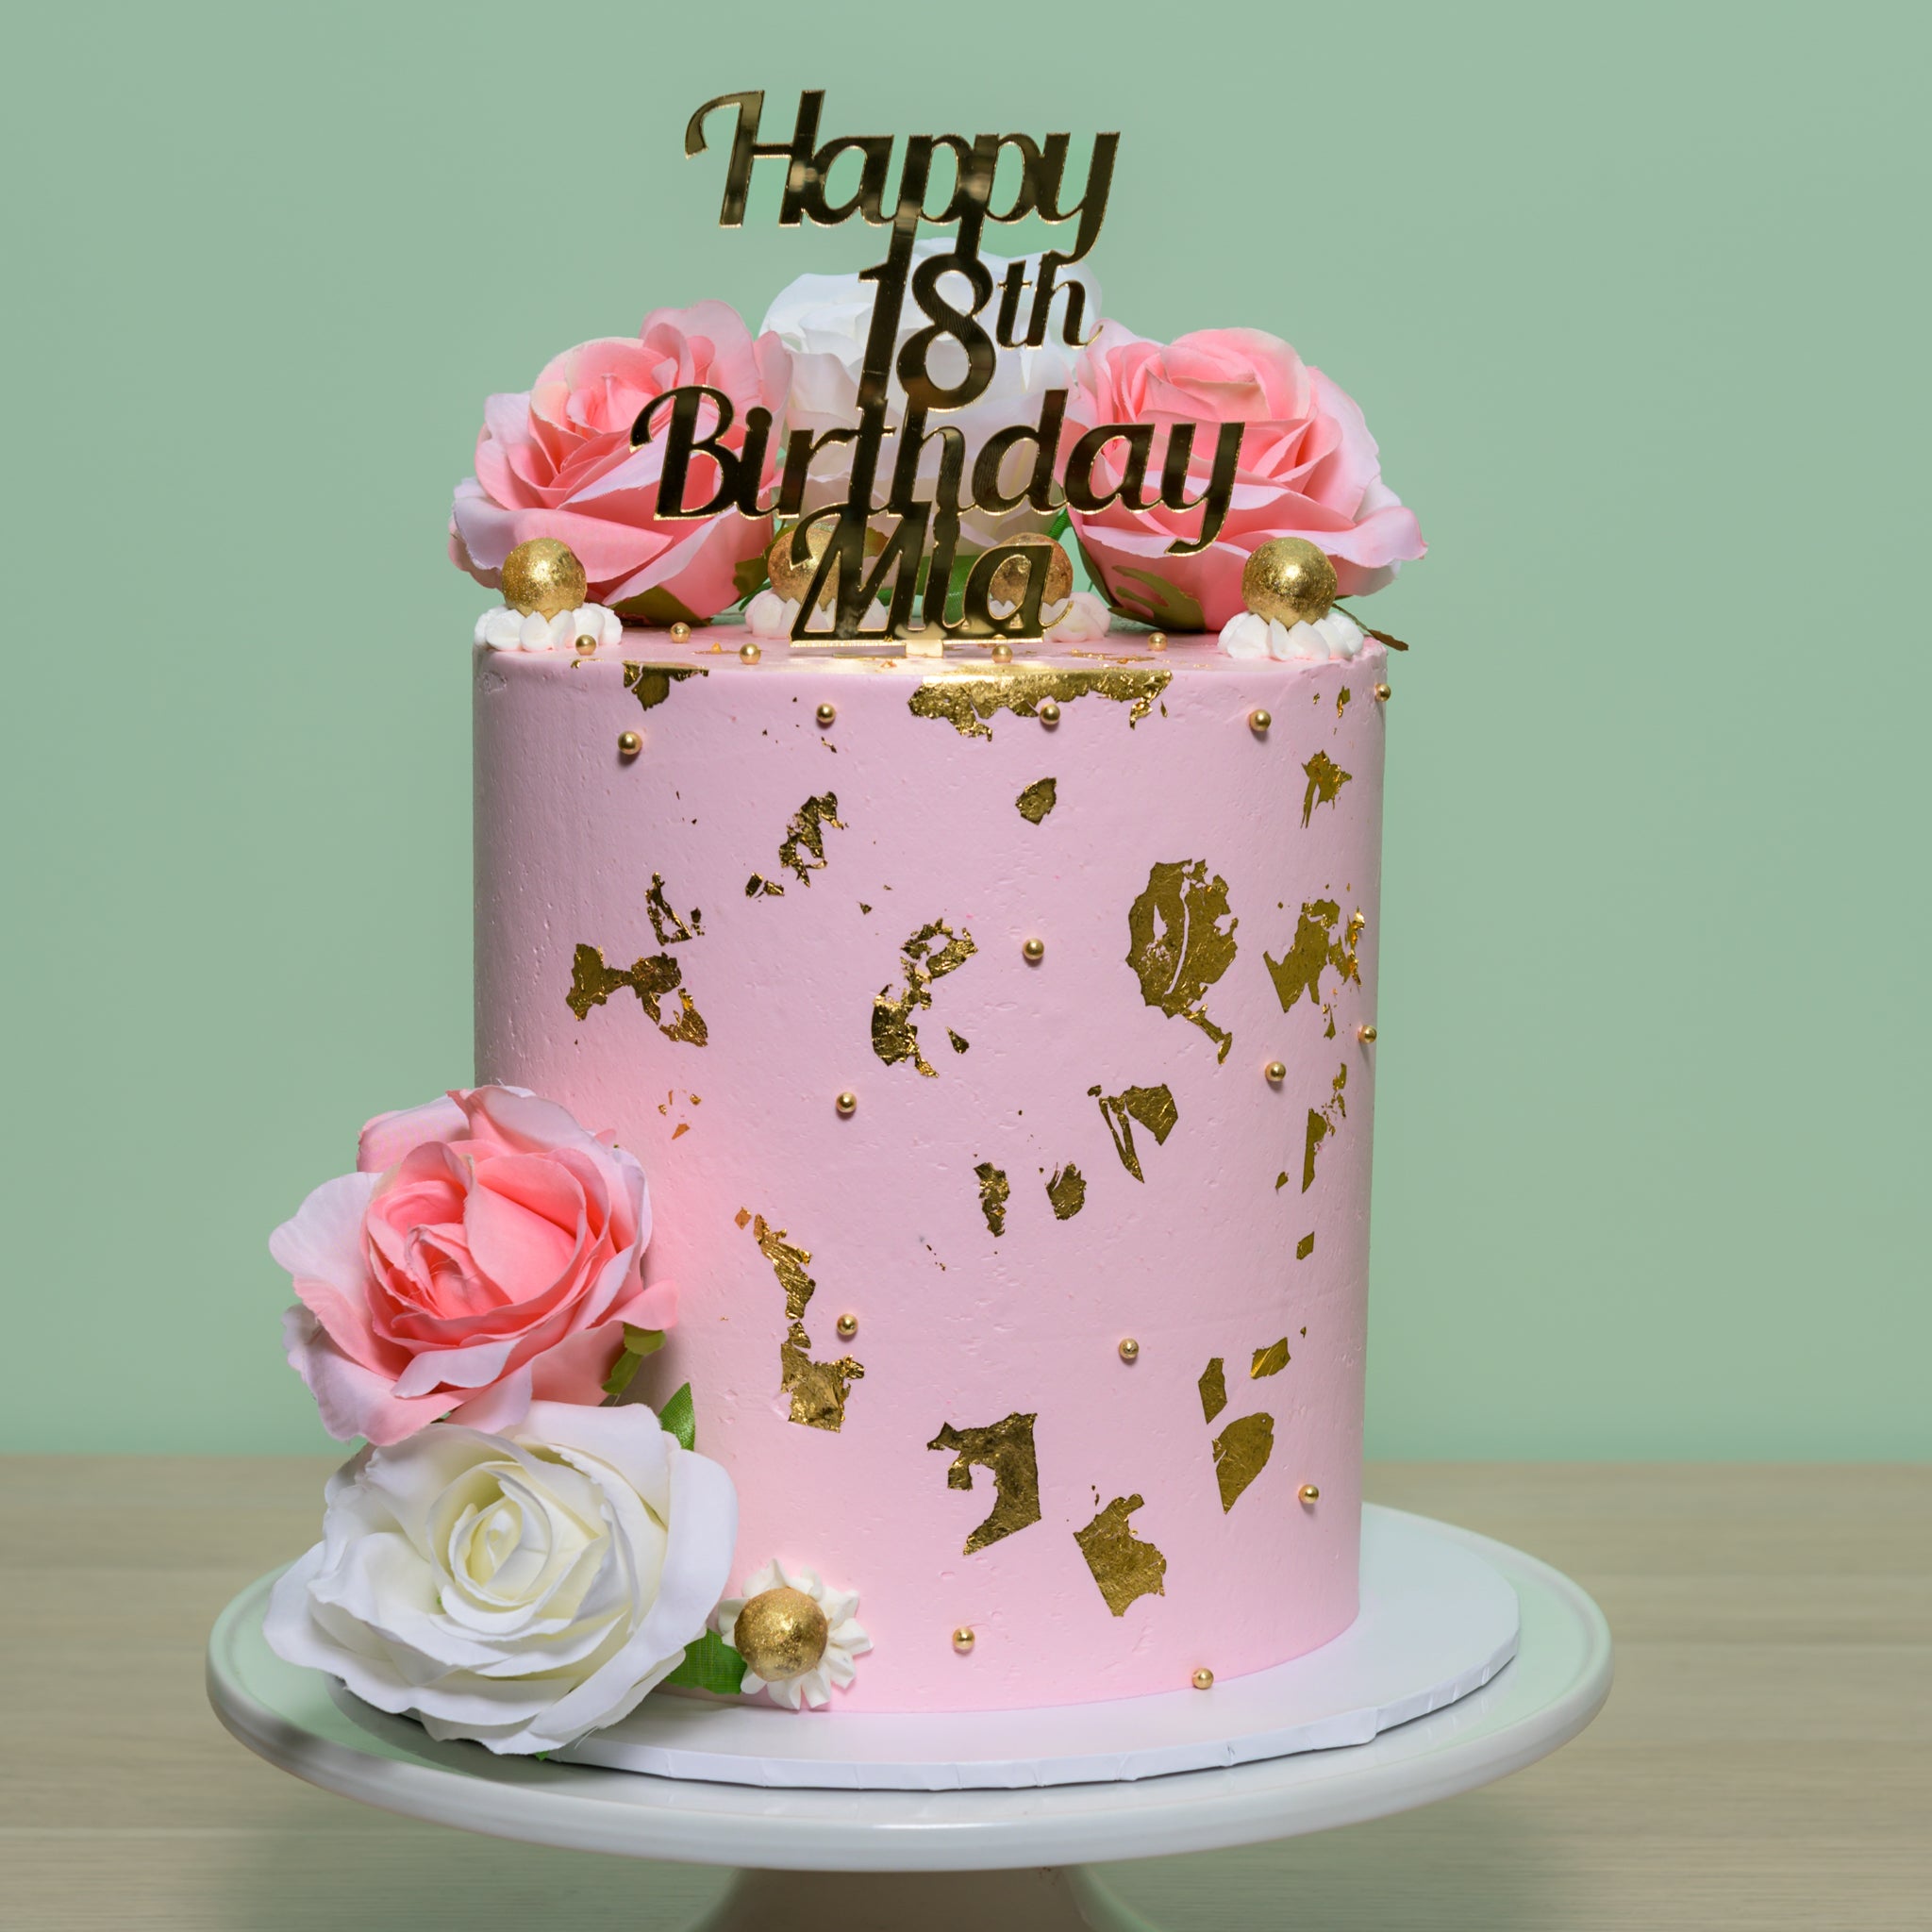 Modern Elegant Birthday Cake With Melted White Chocolate, Golden Heart And  Chocolate Balls, Macaroons, Meringue And Caramel. Stock Photo, Picture and  Royalty Free Image. Image 150005348.